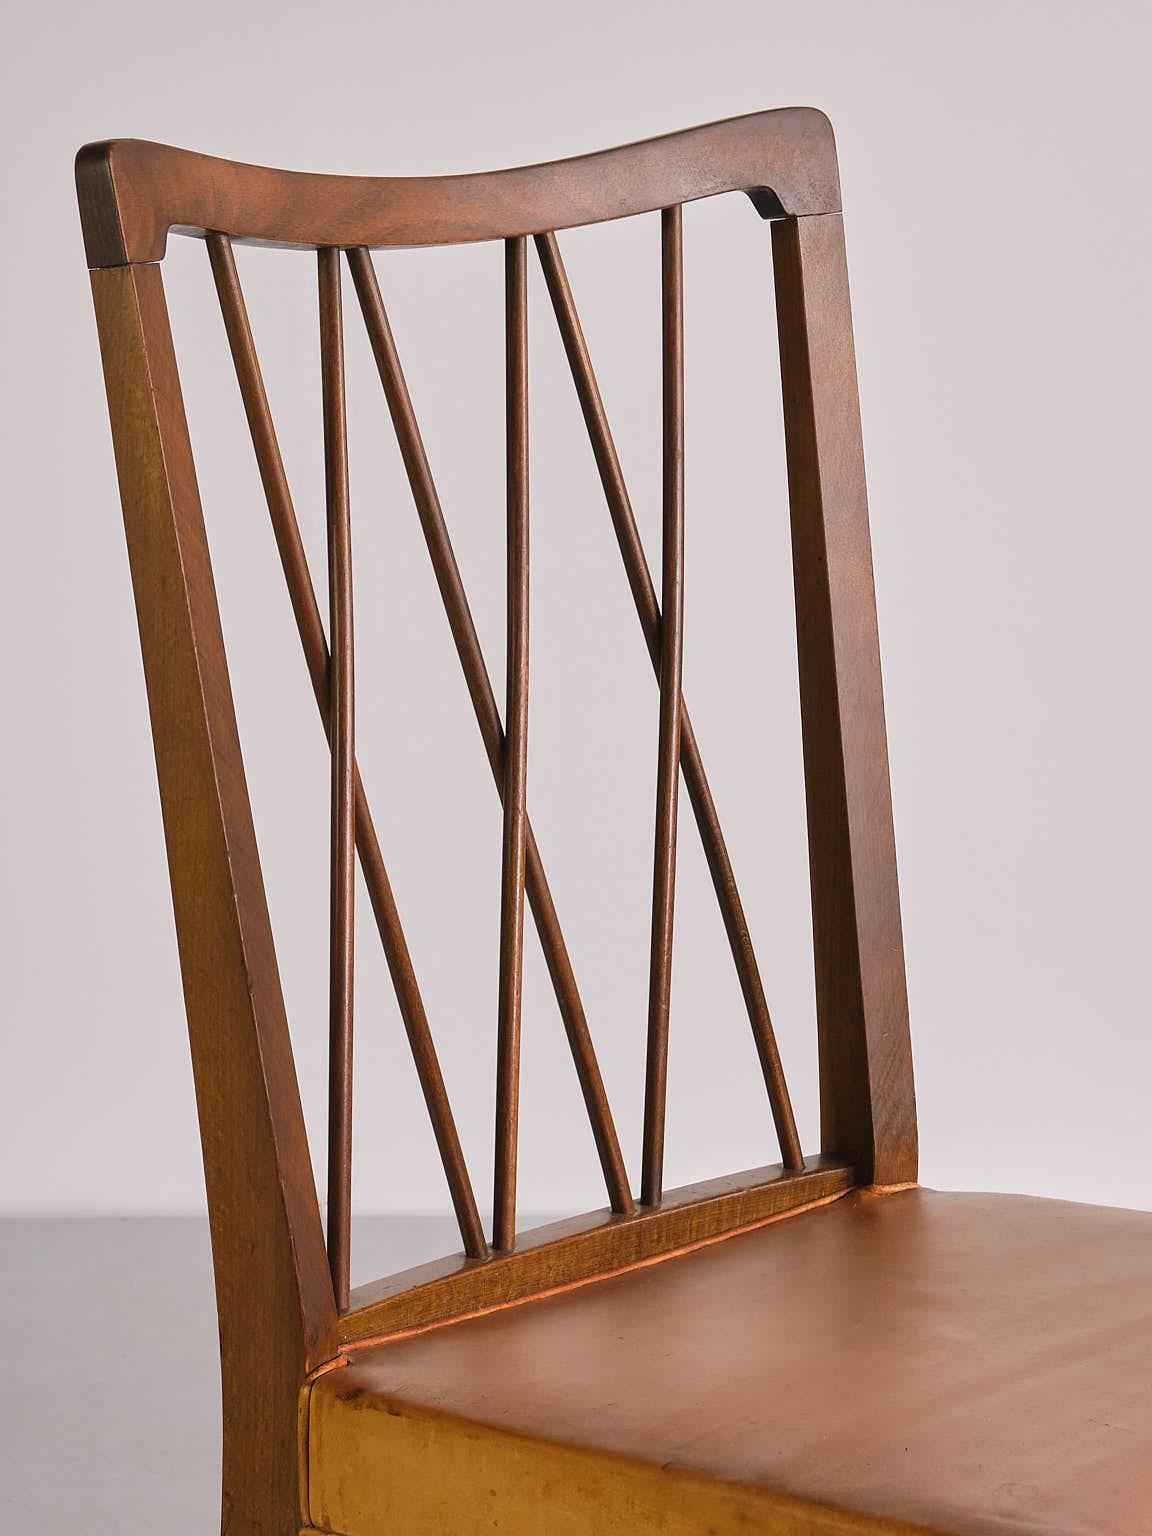 Set of Eight Frode Holm Dining Chairs, Walnut and Leather, Illum, Denmark, 1940s For Sale 6